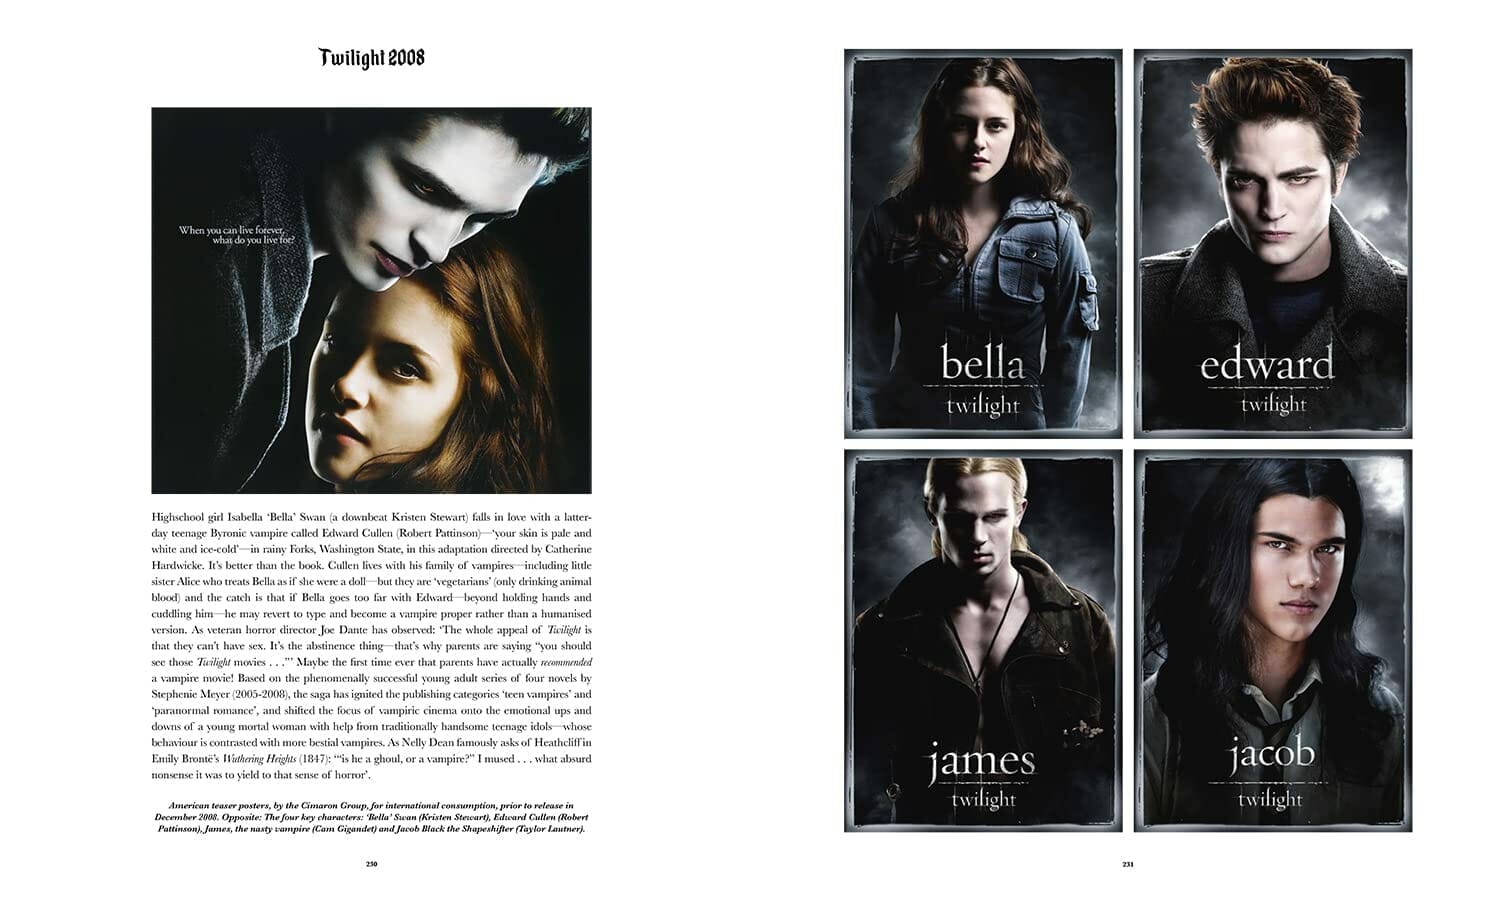 Vampire Cinema - The First One Hundred Years layout preview - twilight